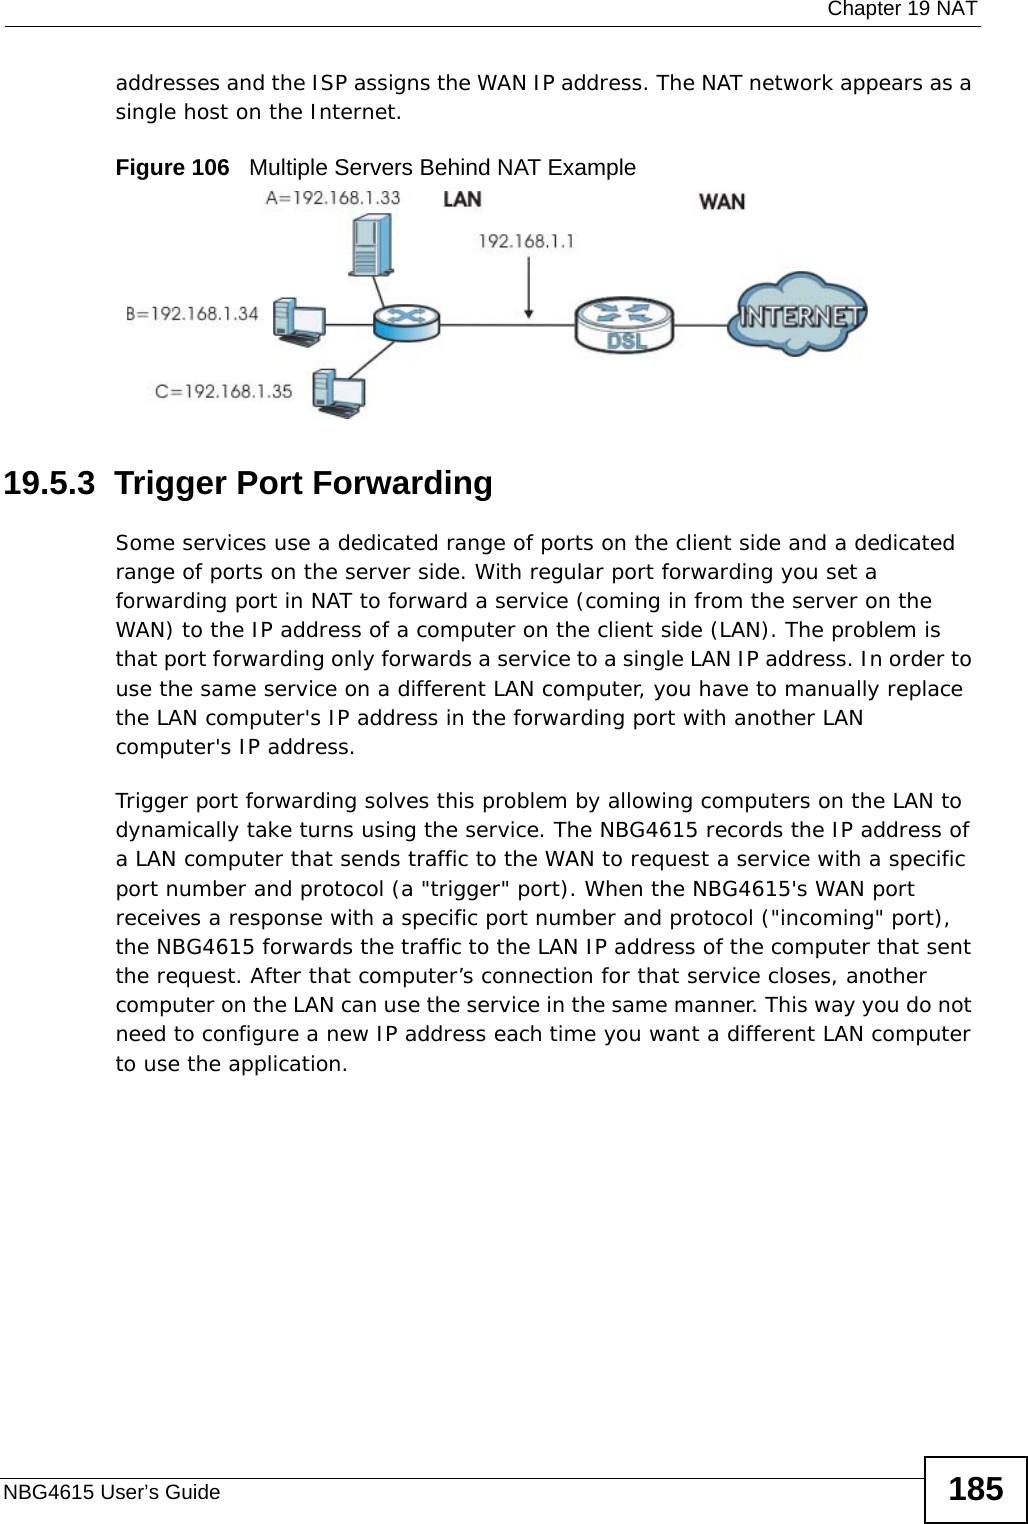  Chapter 19 NATNBG4615 User’s Guide 185addresses and the ISP assigns the WAN IP address. The NAT network appears as a single host on the Internet.Figure 106   Multiple Servers Behind NAT Example19.5.3  Trigger Port Forwarding Some services use a dedicated range of ports on the client side and a dedicated range of ports on the server side. With regular port forwarding you set a forwarding port in NAT to forward a service (coming in from the server on the WAN) to the IP address of a computer on the client side (LAN). The problem is that port forwarding only forwards a service to a single LAN IP address. In order to use the same service on a different LAN computer, you have to manually replace the LAN computer&apos;s IP address in the forwarding port with another LAN computer&apos;s IP address. Trigger port forwarding solves this problem by allowing computers on the LAN to dynamically take turns using the service. The NBG4615 records the IP address of a LAN computer that sends traffic to the WAN to request a service with a specific port number and protocol (a &quot;trigger&quot; port). When the NBG4615&apos;s WAN port receives a response with a specific port number and protocol (&quot;incoming&quot; port), the NBG4615 forwards the traffic to the LAN IP address of the computer that sent the request. After that computer’s connection for that service closes, another computer on the LAN can use the service in the same manner. This way you do not need to configure a new IP address each time you want a different LAN computer to use the application.